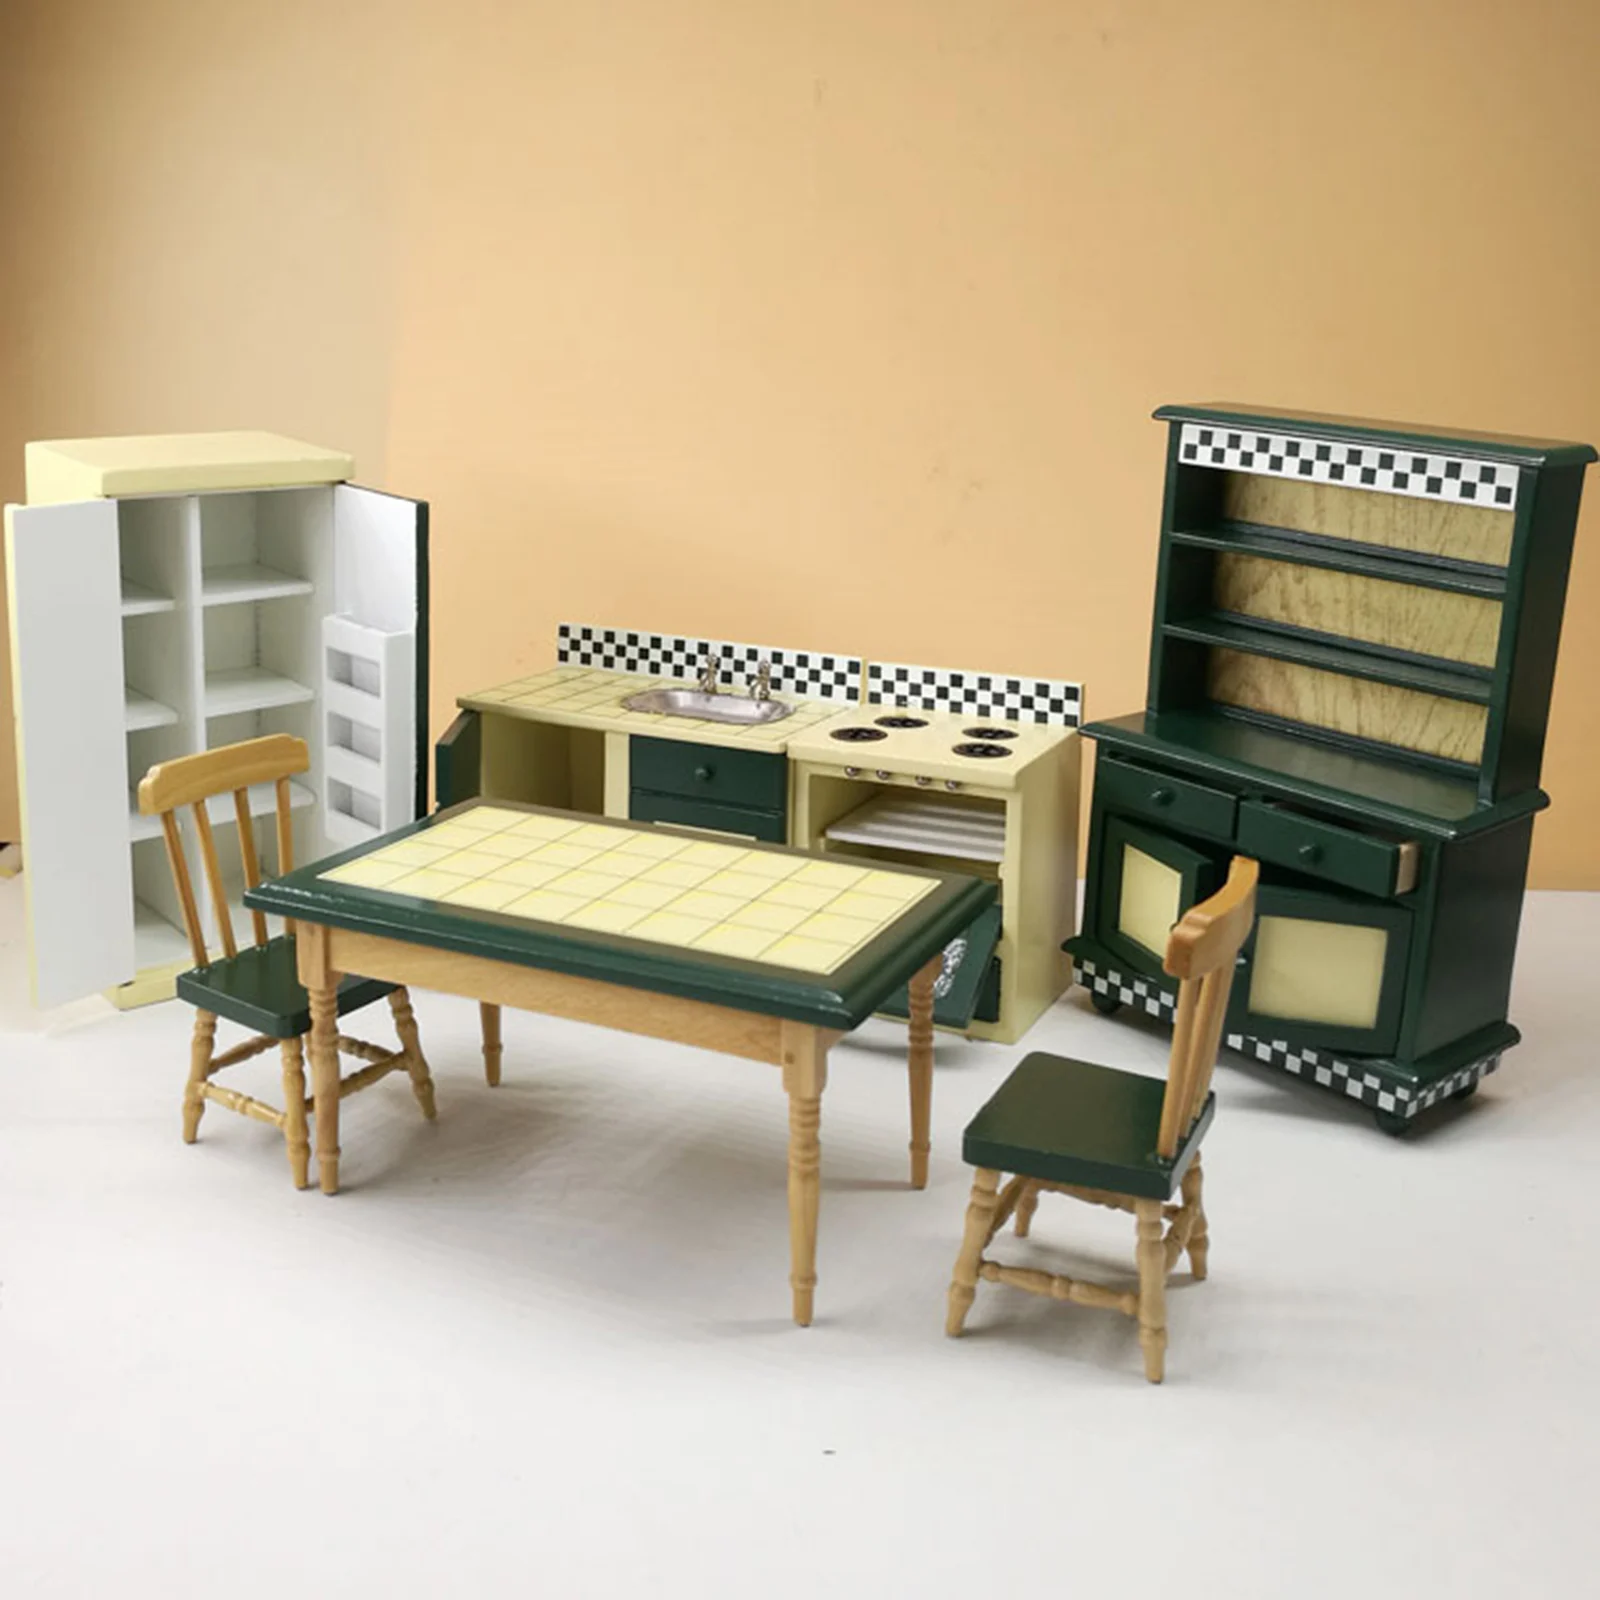 7pcs Miniature Dollhouse Kitchen Furniture Model Kit 1:12 Scale Handcrafted Refrigerator Cupboard Table Doll House Accessories